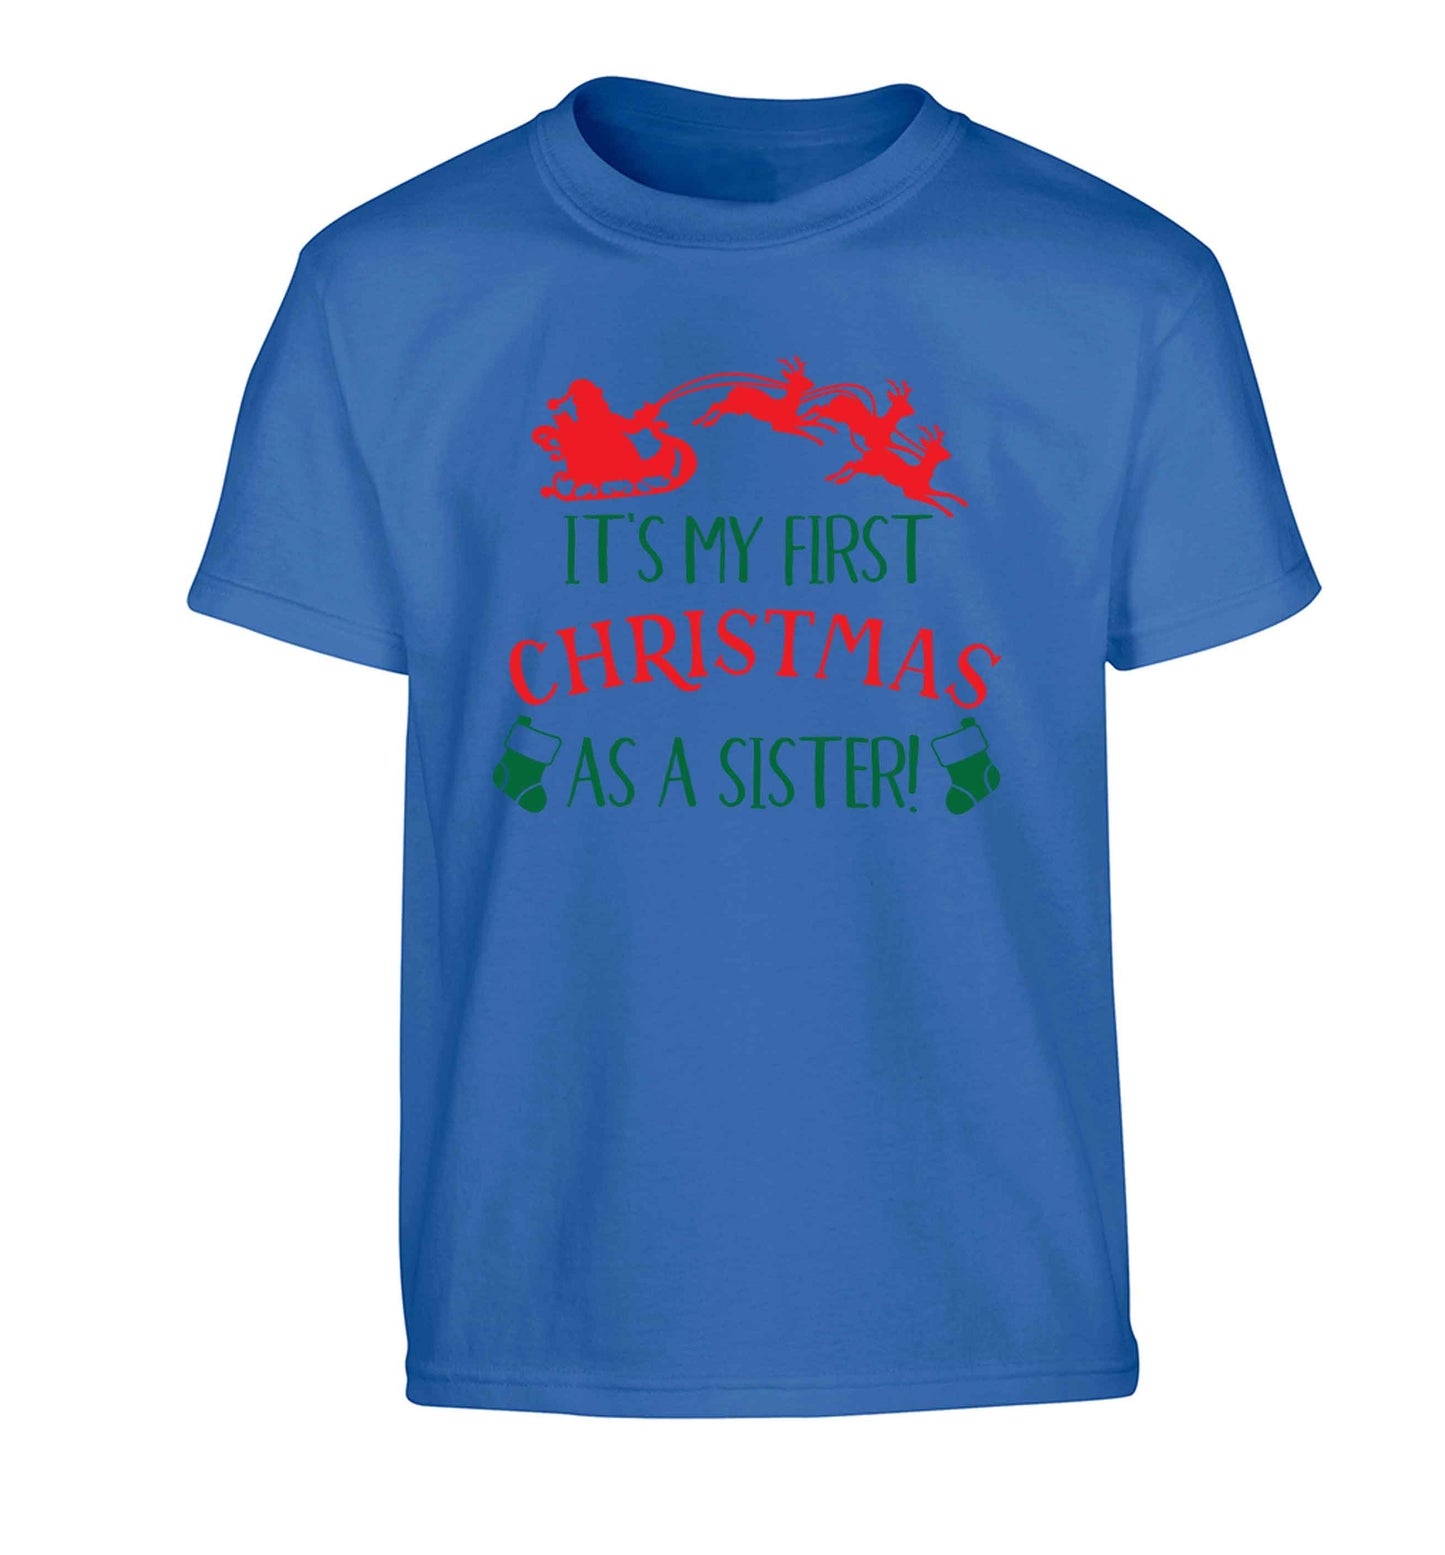 It's my first Christmas as a sister! Children's blue Tshirt 12-13 Years